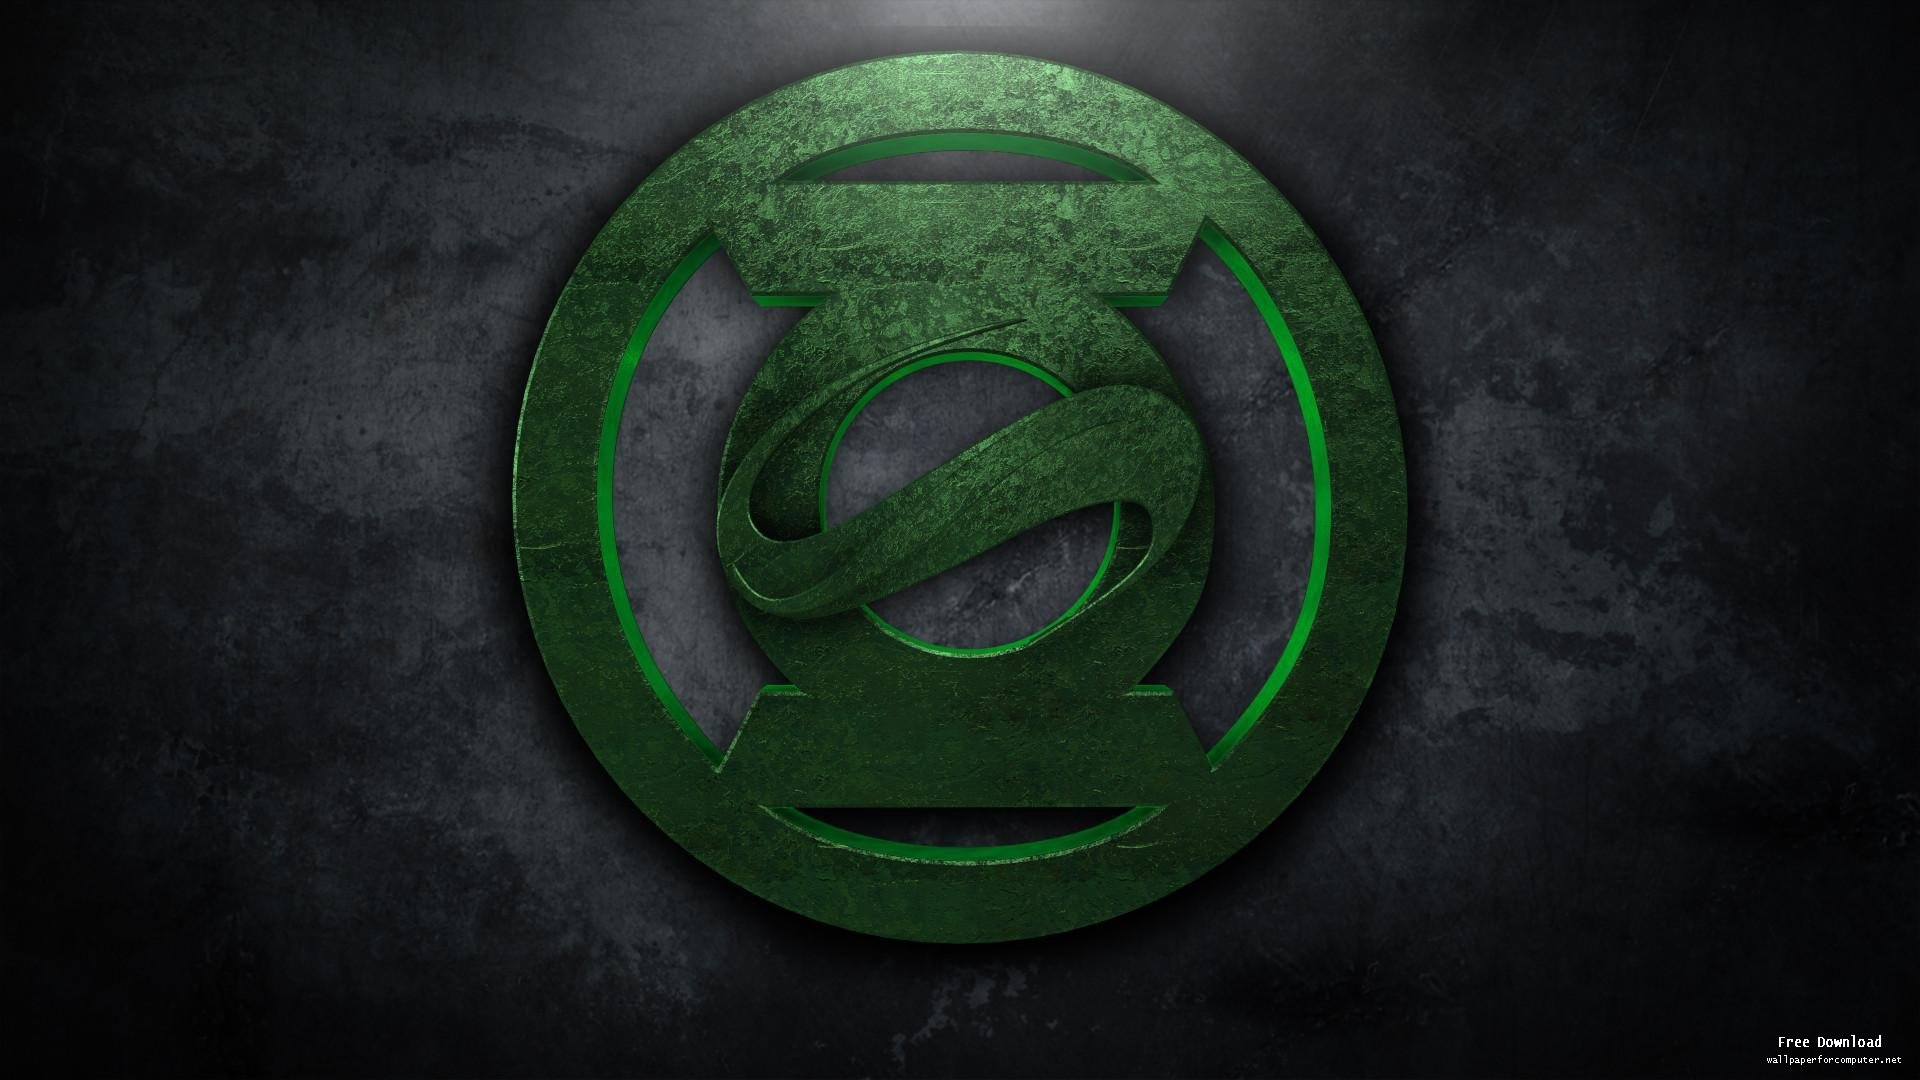 Green Lantern logo Wallpapers for Computer 218   HD Wallpapers Site